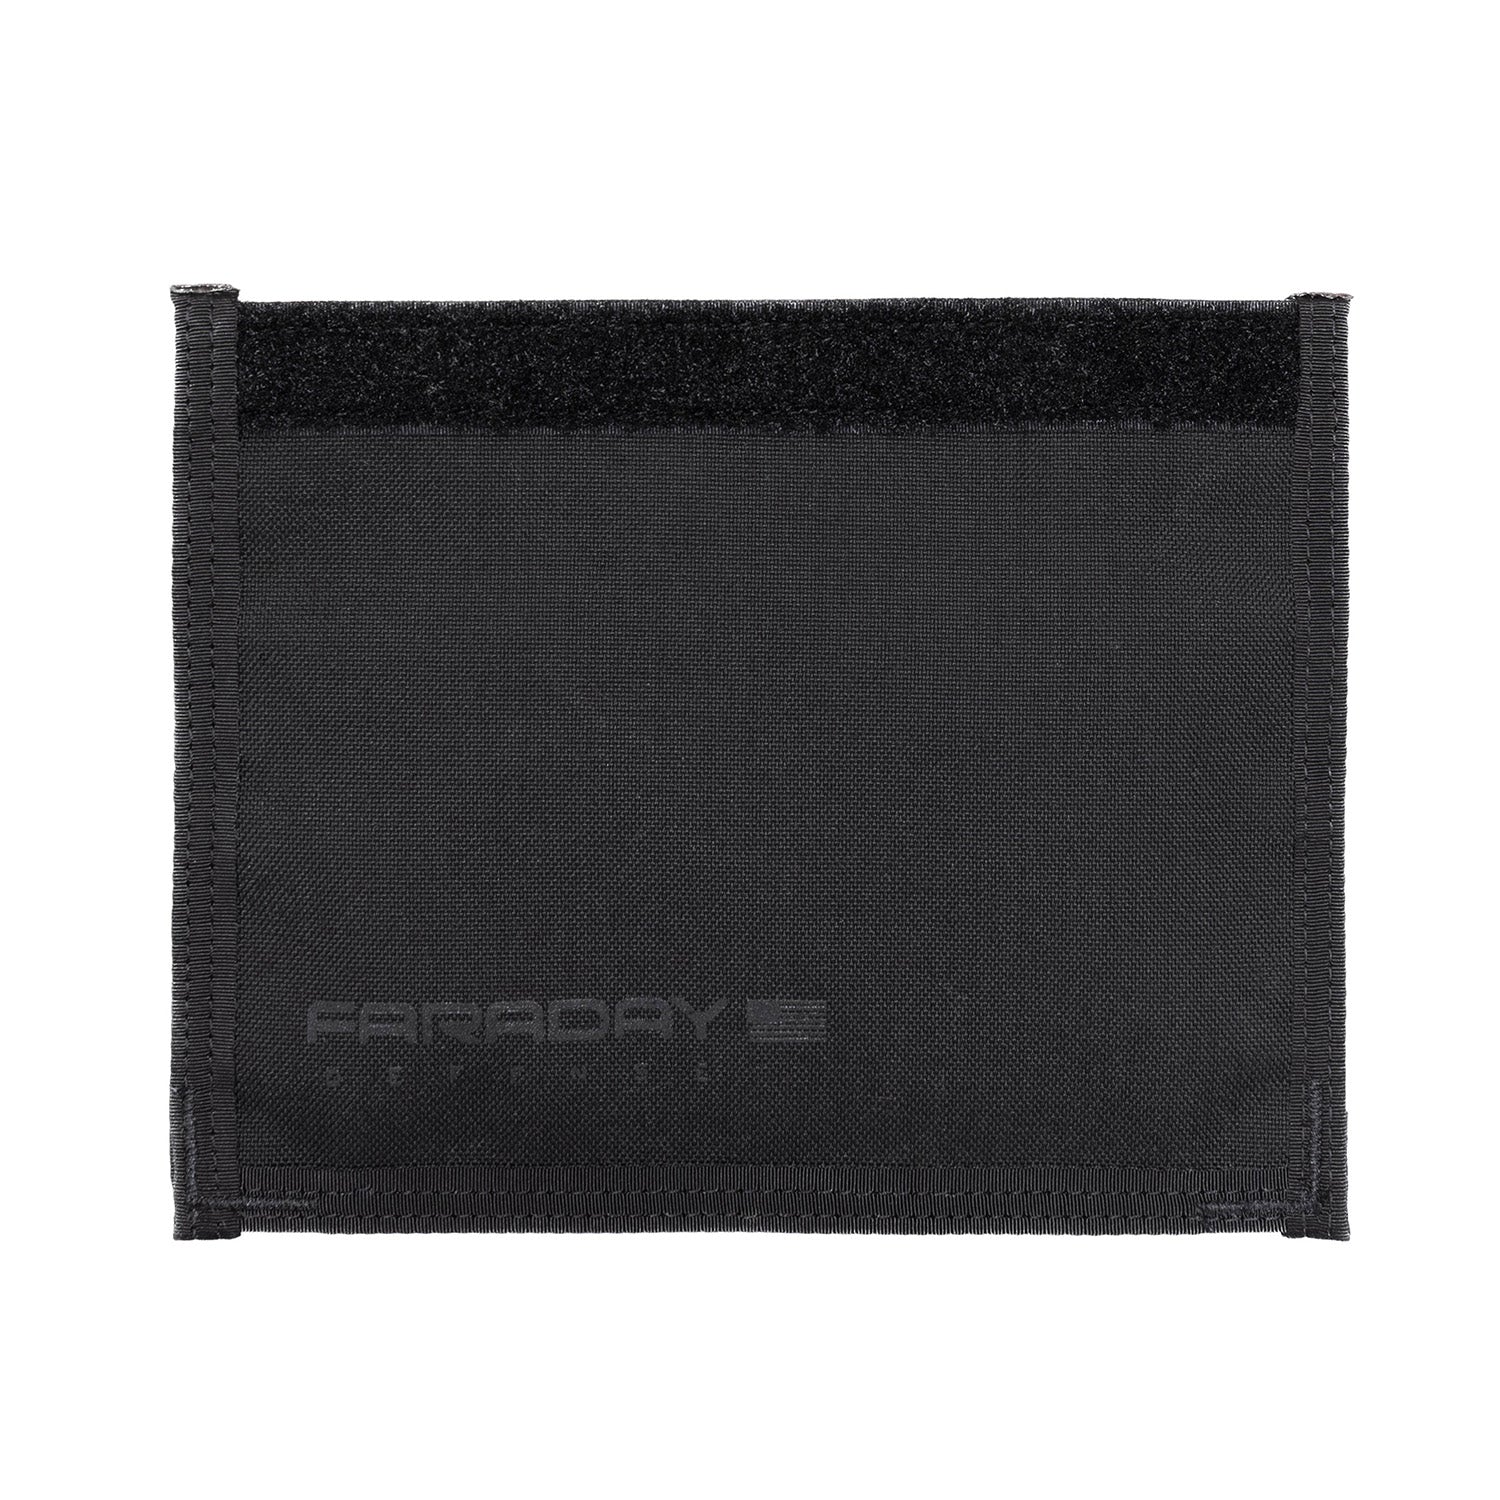 Military-grade Faraday Bag for Phones ID and Hard Drives Anti-hacking &  Anti-tracking 5G Blocker Signal Blocker / Protect Your Privacy 